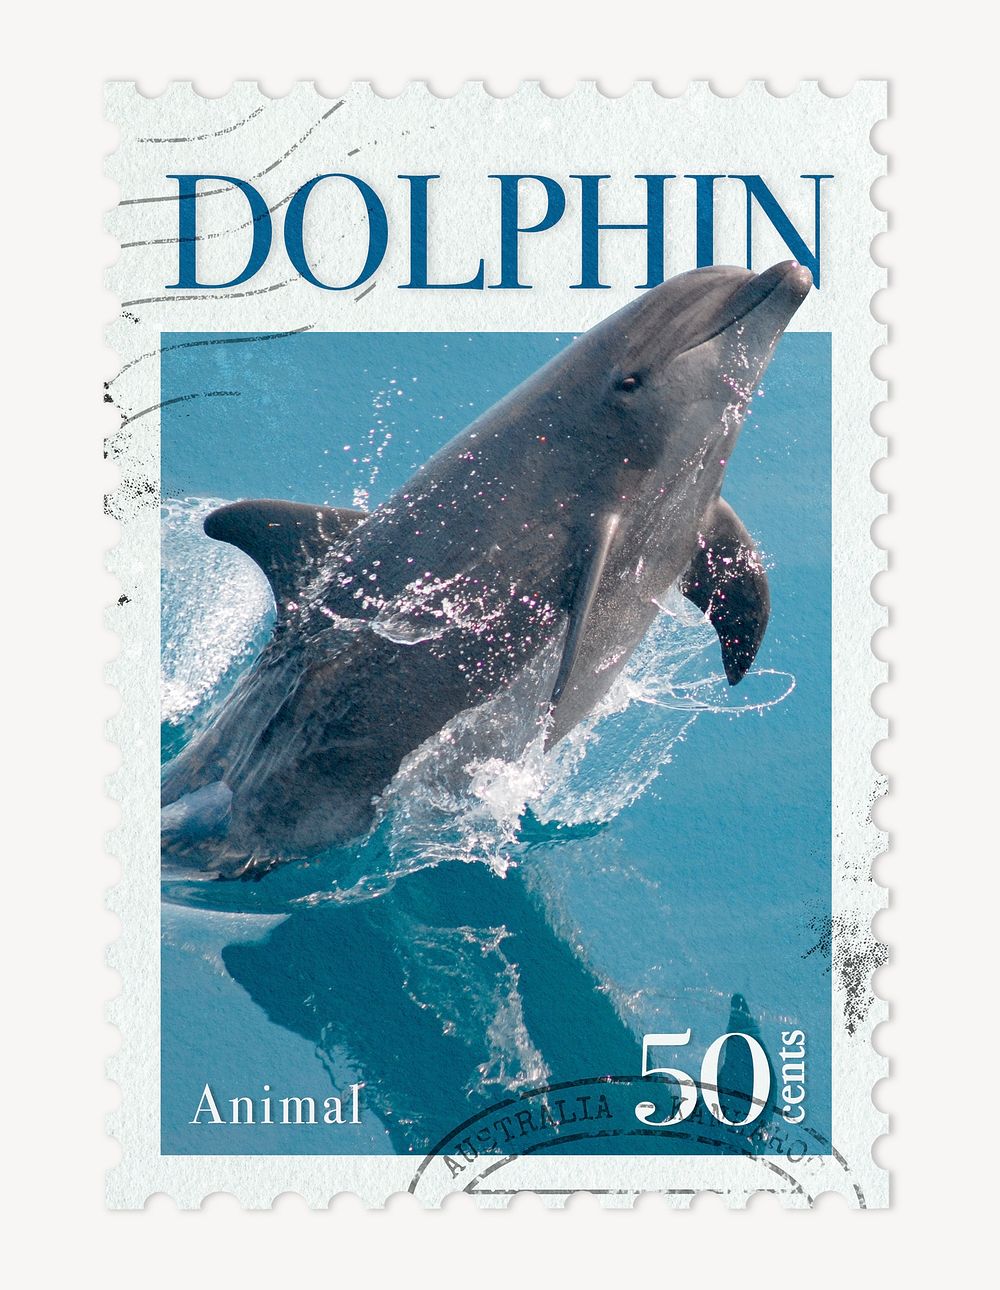 Dolphin postage stamp, aesthetic animal graphic